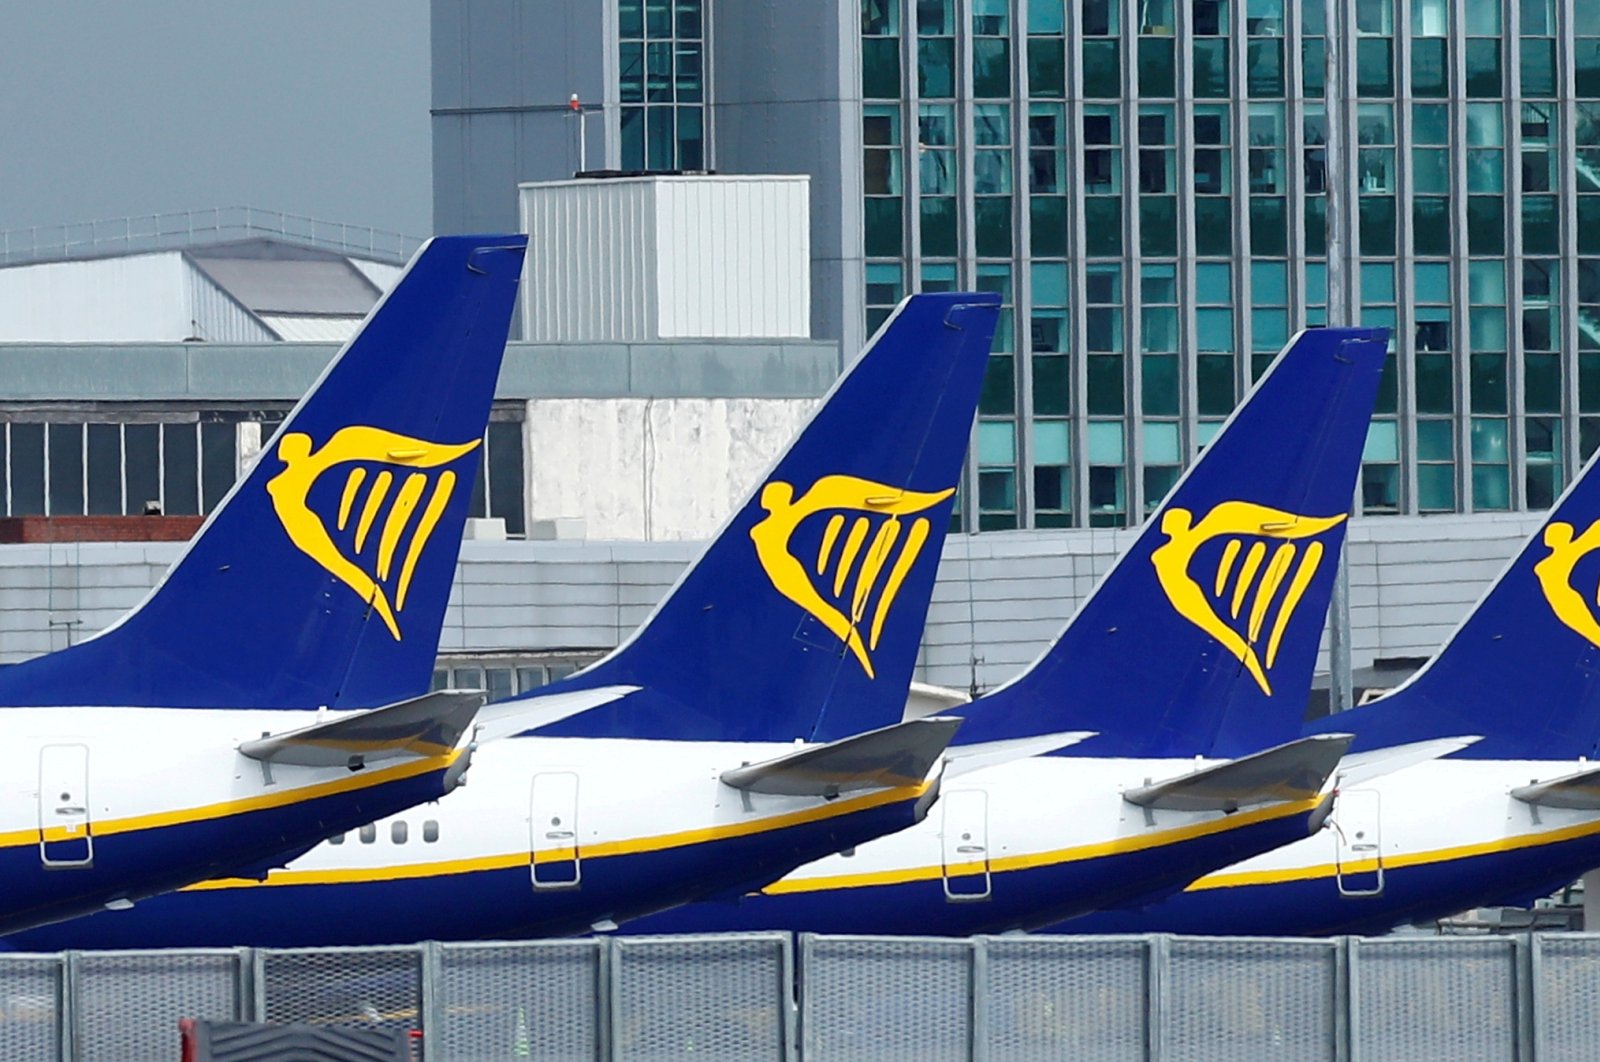 Ryanair planes are seen at Dublin Airport amid the COVID-19 pandemic in Dublin, Ireland, May 1, 2020. (Reuters Photo)